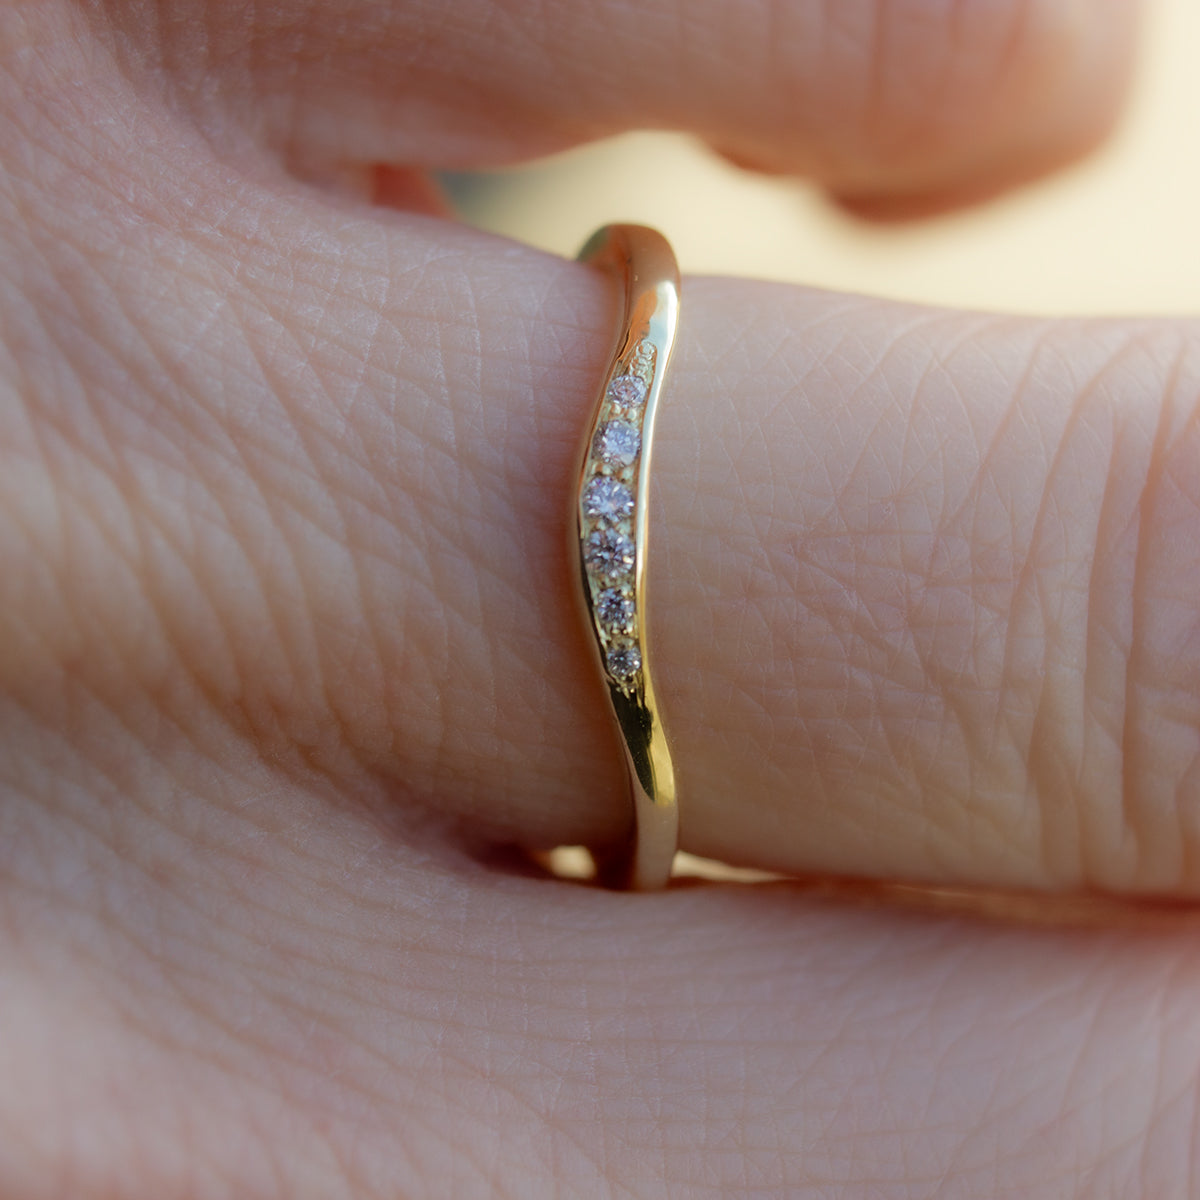 Curved shaped gold wedding band with pavé set white diamonds